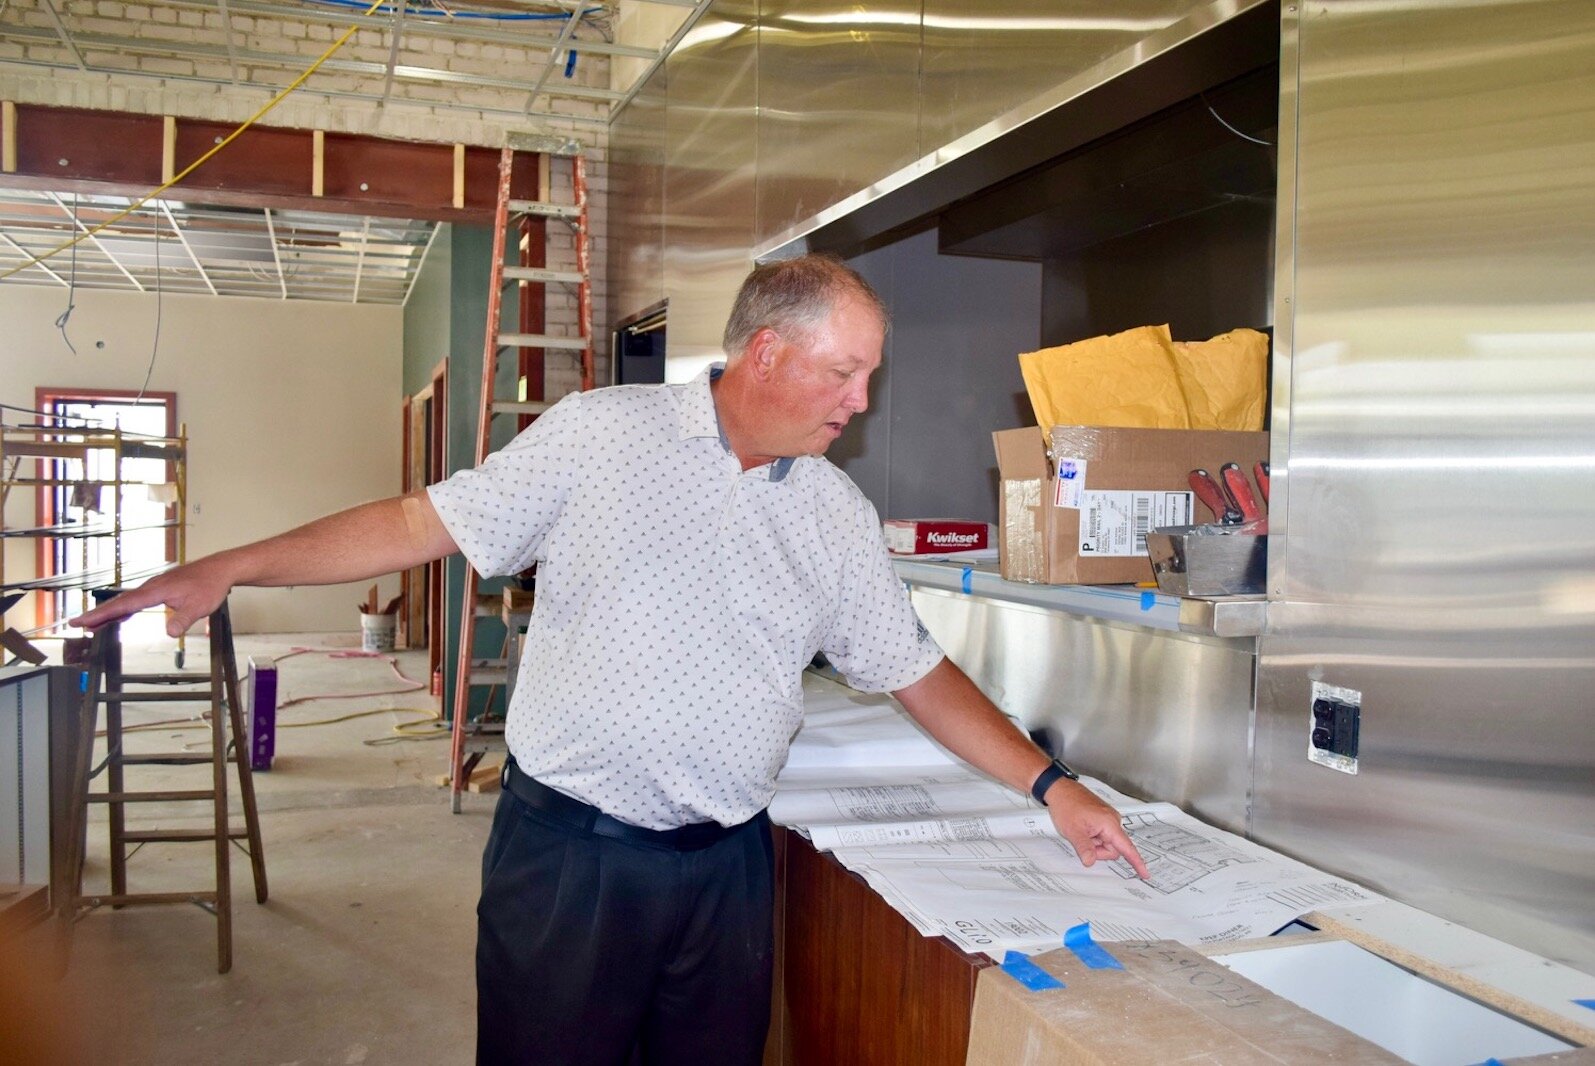 William DeBoer, president and CEO of the Kalamazoo Probation Enhancement Program, looks at renovation plans last July inside the organization’s W/P Diner @ Washington Square.